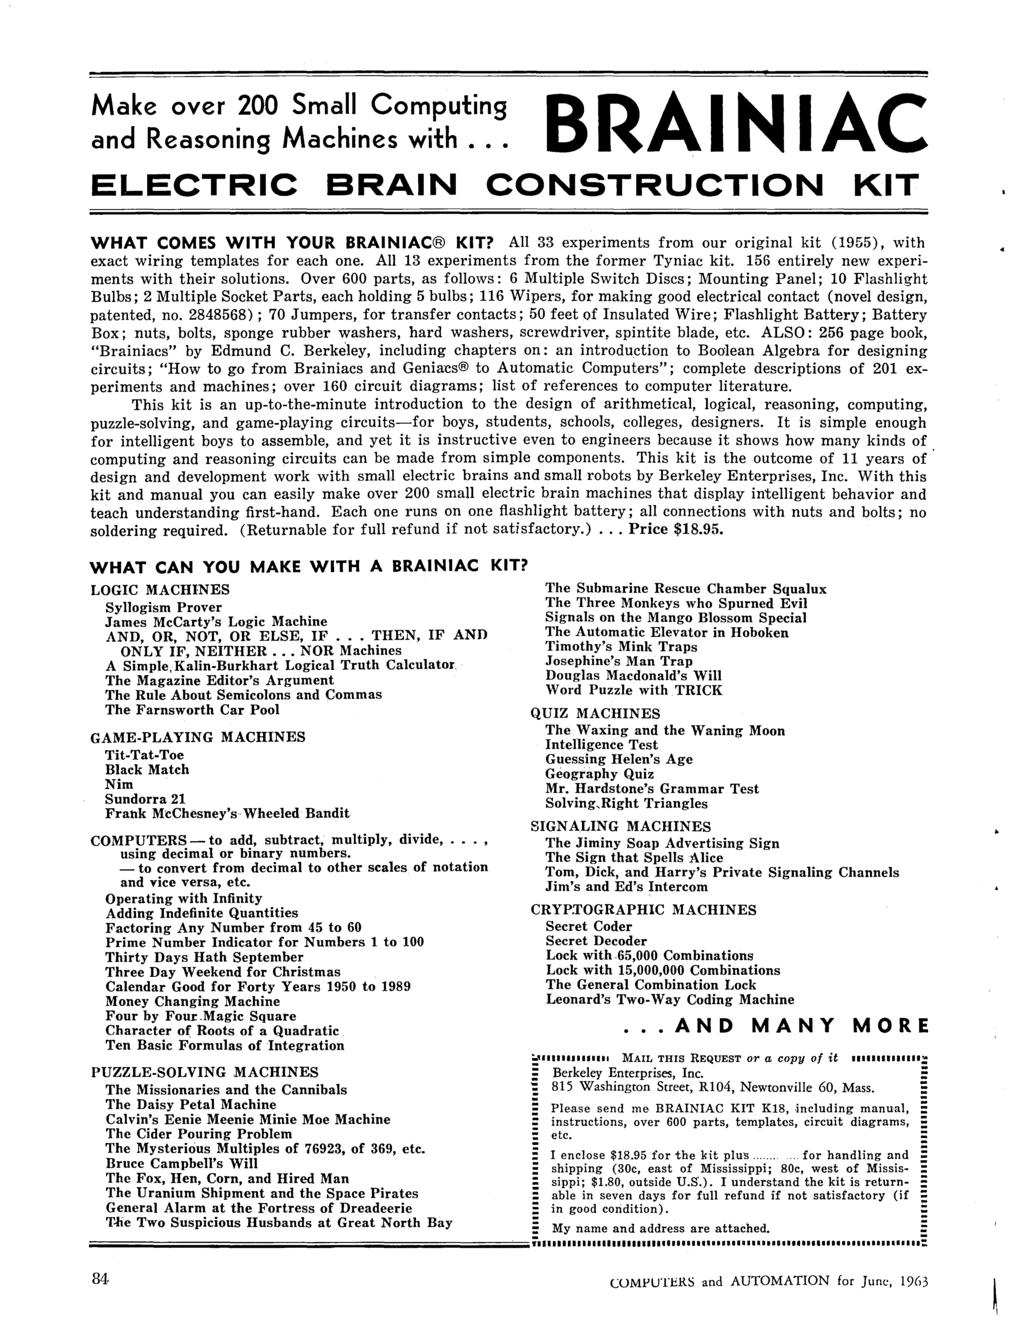 Make over 200 Small Computing BRAINIAC and Reasoning Machines with... ELECTRIC BRAIN CONSTRUCTION KIT WHAT COMES WITH YOUR BRAINIAC KIT?